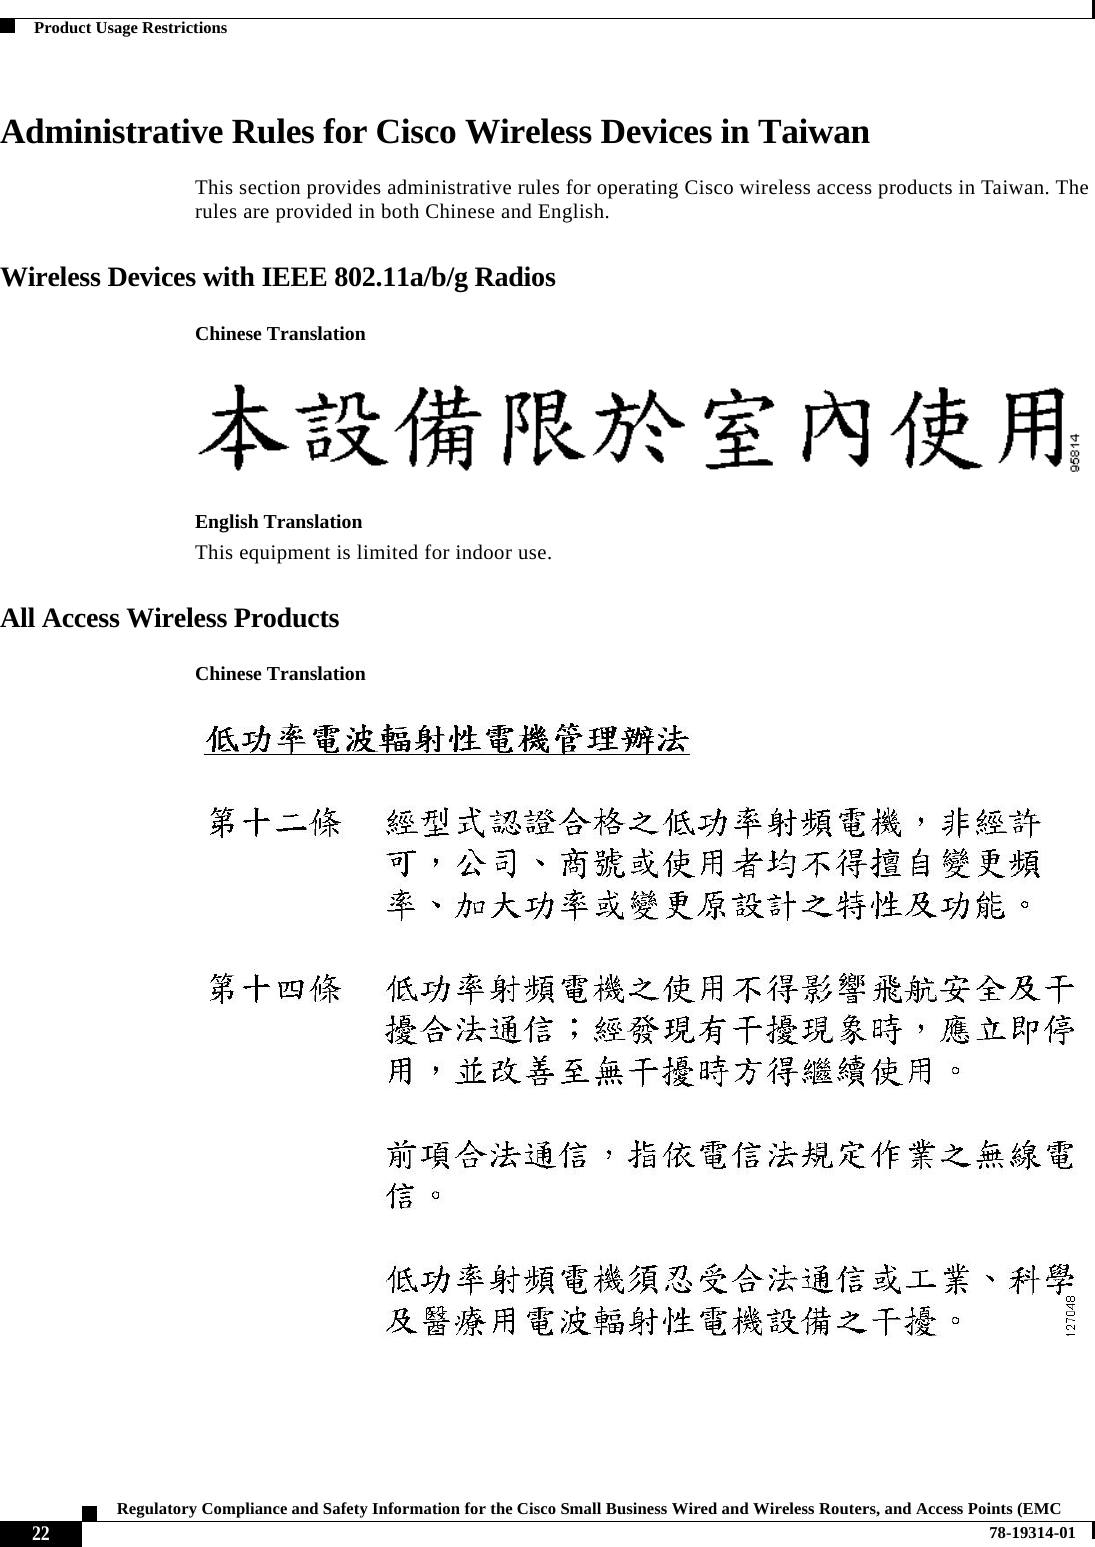  22Regulatory Compliance and Safety Information for the Cisco Small Business Wired and Wireless Routers, and Access Points (EMC 78-19314-01Product Usage RestrictionsAdministrative Rules for Cisco Wireless Devices in TaiwanThis section provides administrative rules for operating Cisco wireless access products in Taiwan. The rules are provided in both Chinese and English.Wireless Devices with IEEE 802.11a/b/g RadiosChinese TranslationEnglish TranslationThis equipment is limited for indoor use.All Access Wireless ProductsChinese Translation